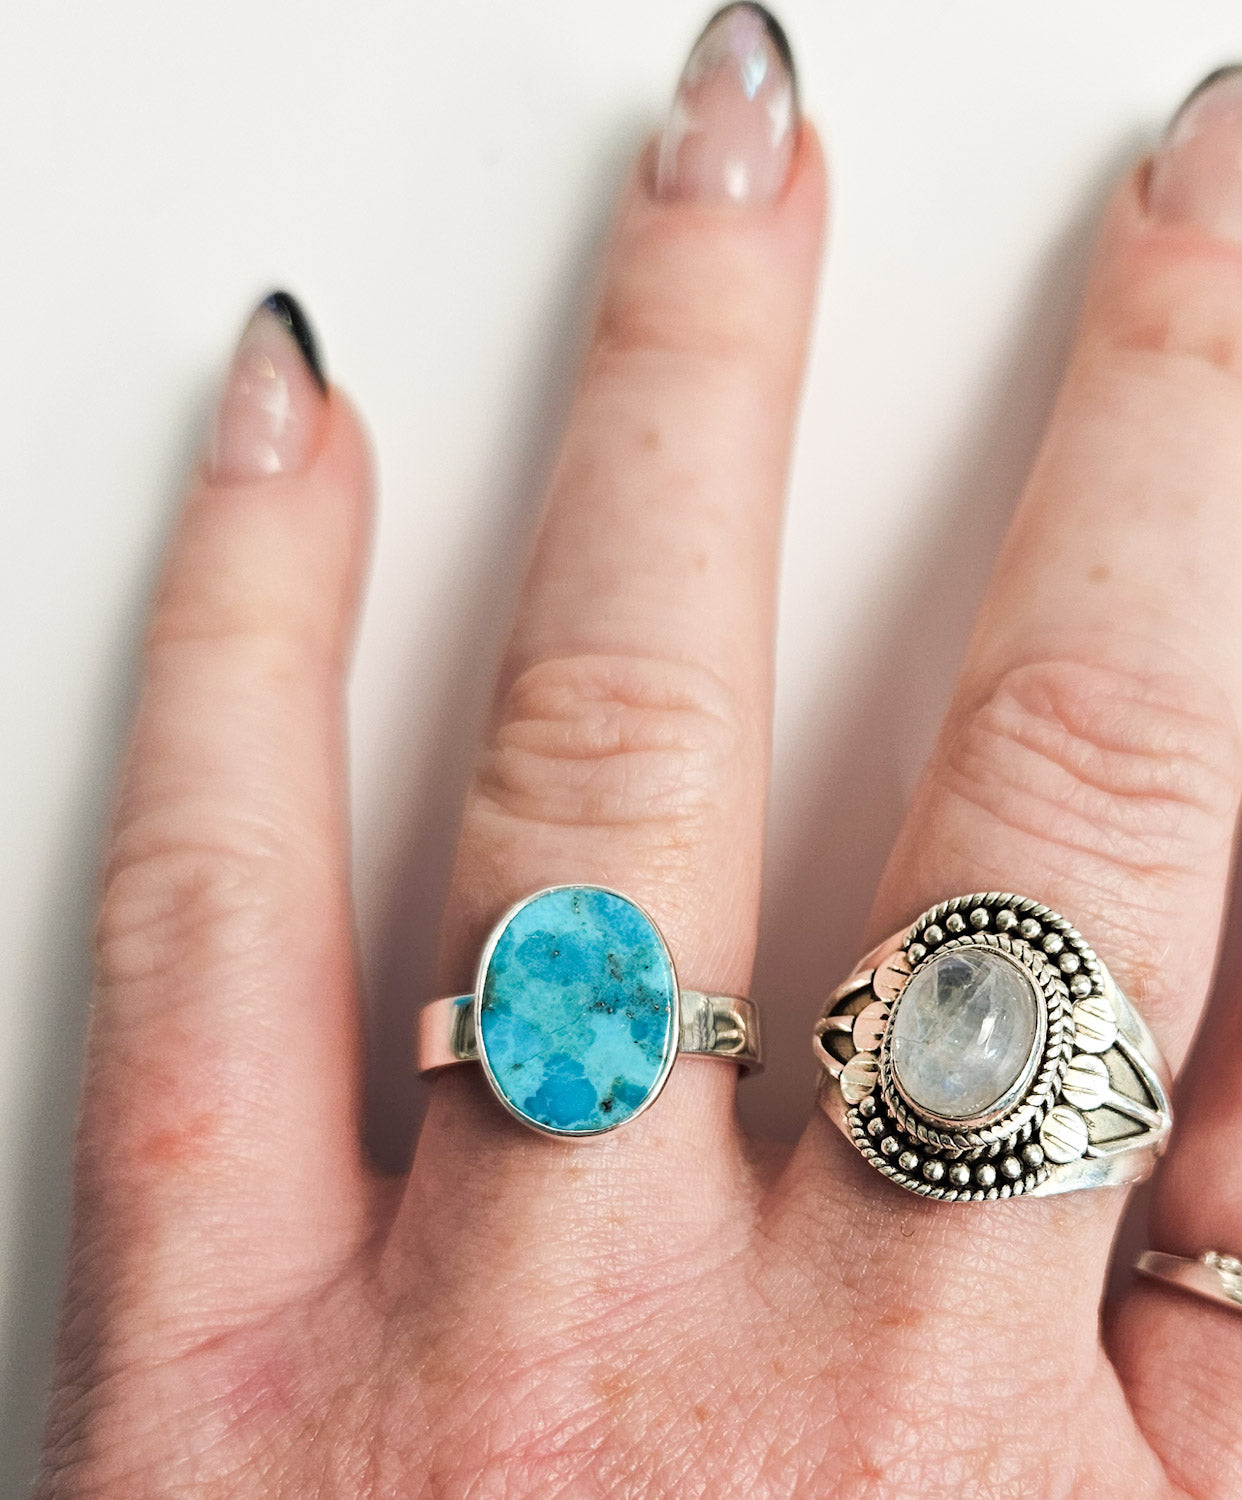 Turquoise oval ring